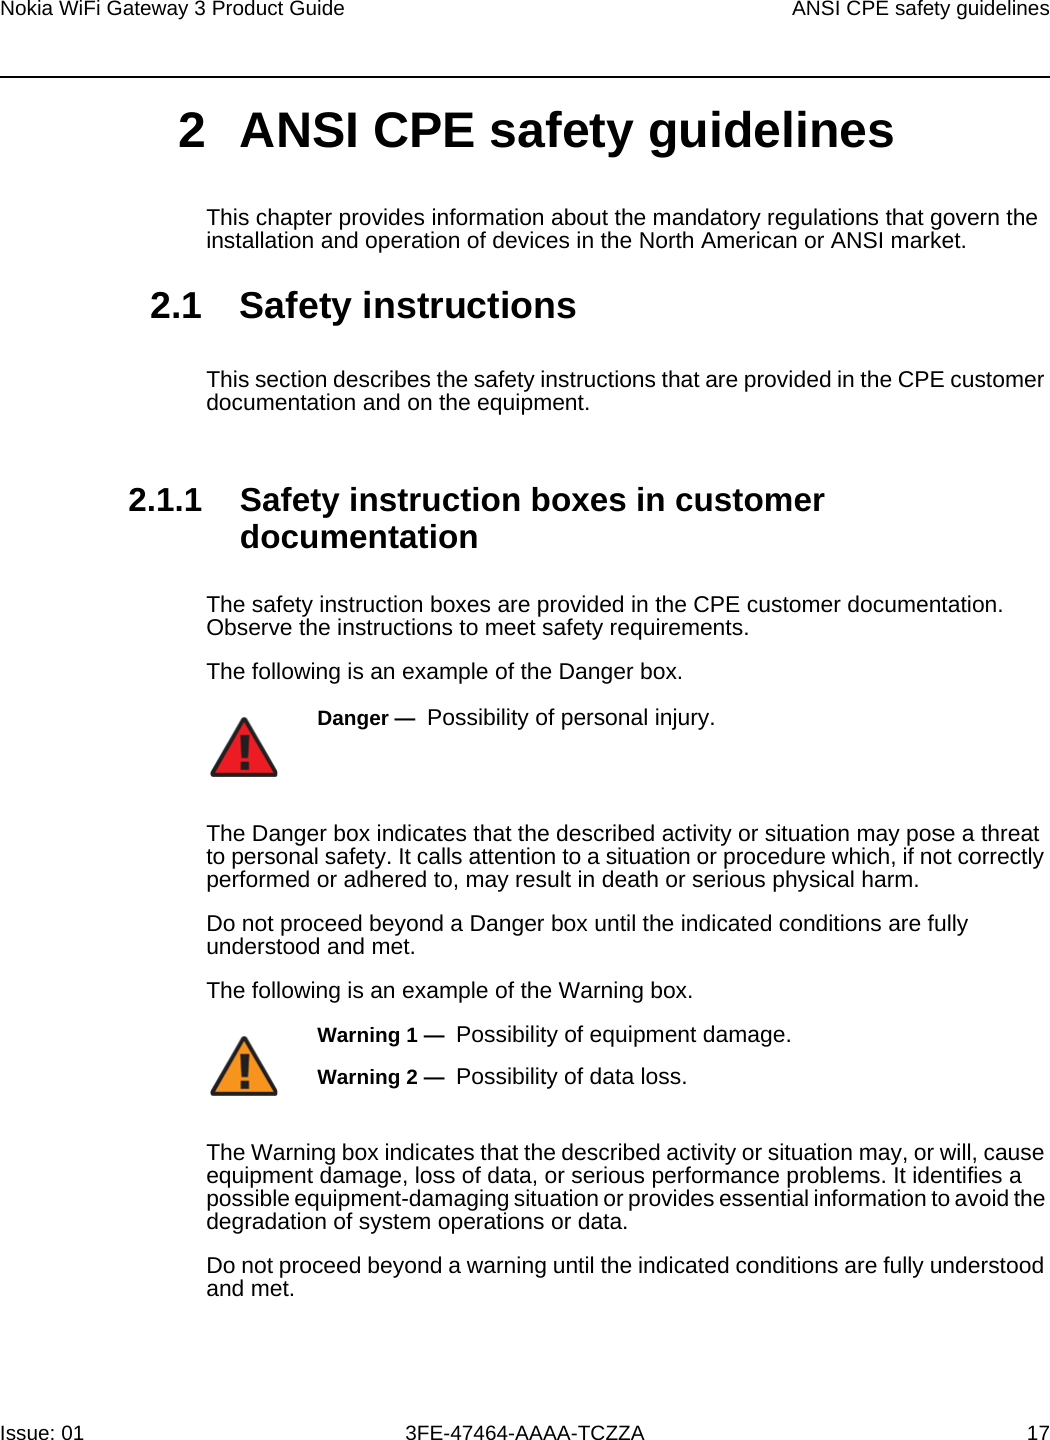 Nokia WiFi Gateway 3 Product Guide ANSI CPE safety guidelinesIssue: 01 3FE-47464-AAAA-TCZZA 17 2 ANSI CPE safety guidelinesThis chapter provides information about the mandatory regulations that govern the installation and operation of devices in the North American or ANSI market.2.1 Safety instructionsThis section describes the safety instructions that are provided in the CPE customer documentation and on the equipment.2.1.1 Safety instruction boxes in customer documentationThe safety instruction boxes are provided in the CPE customer documentation. Observe the instructions to meet safety requirements.The following is an example of the Danger box.The Danger box indicates that the described activity or situation may pose a threat to personal safety. It calls attention to a situation or procedure which, if not correctly performed or adhered to, may result in death or serious physical harm. Do not proceed beyond a Danger box until the indicated conditions are fully understood and met.The following is an example of the Warning box.The Warning box indicates that the described activity or situation may, or will, cause equipment damage, loss of data, or serious performance problems. It identifies a possible equipment-damaging situation or provides essential information to avoid the degradation of system operations or data.Do not proceed beyond a warning until the indicated conditions are fully understood and met.Danger —  Possibility of personal injury. Warning 1 —  Possibility of equipment damage.Warning 2 —  Possibility of data loss.